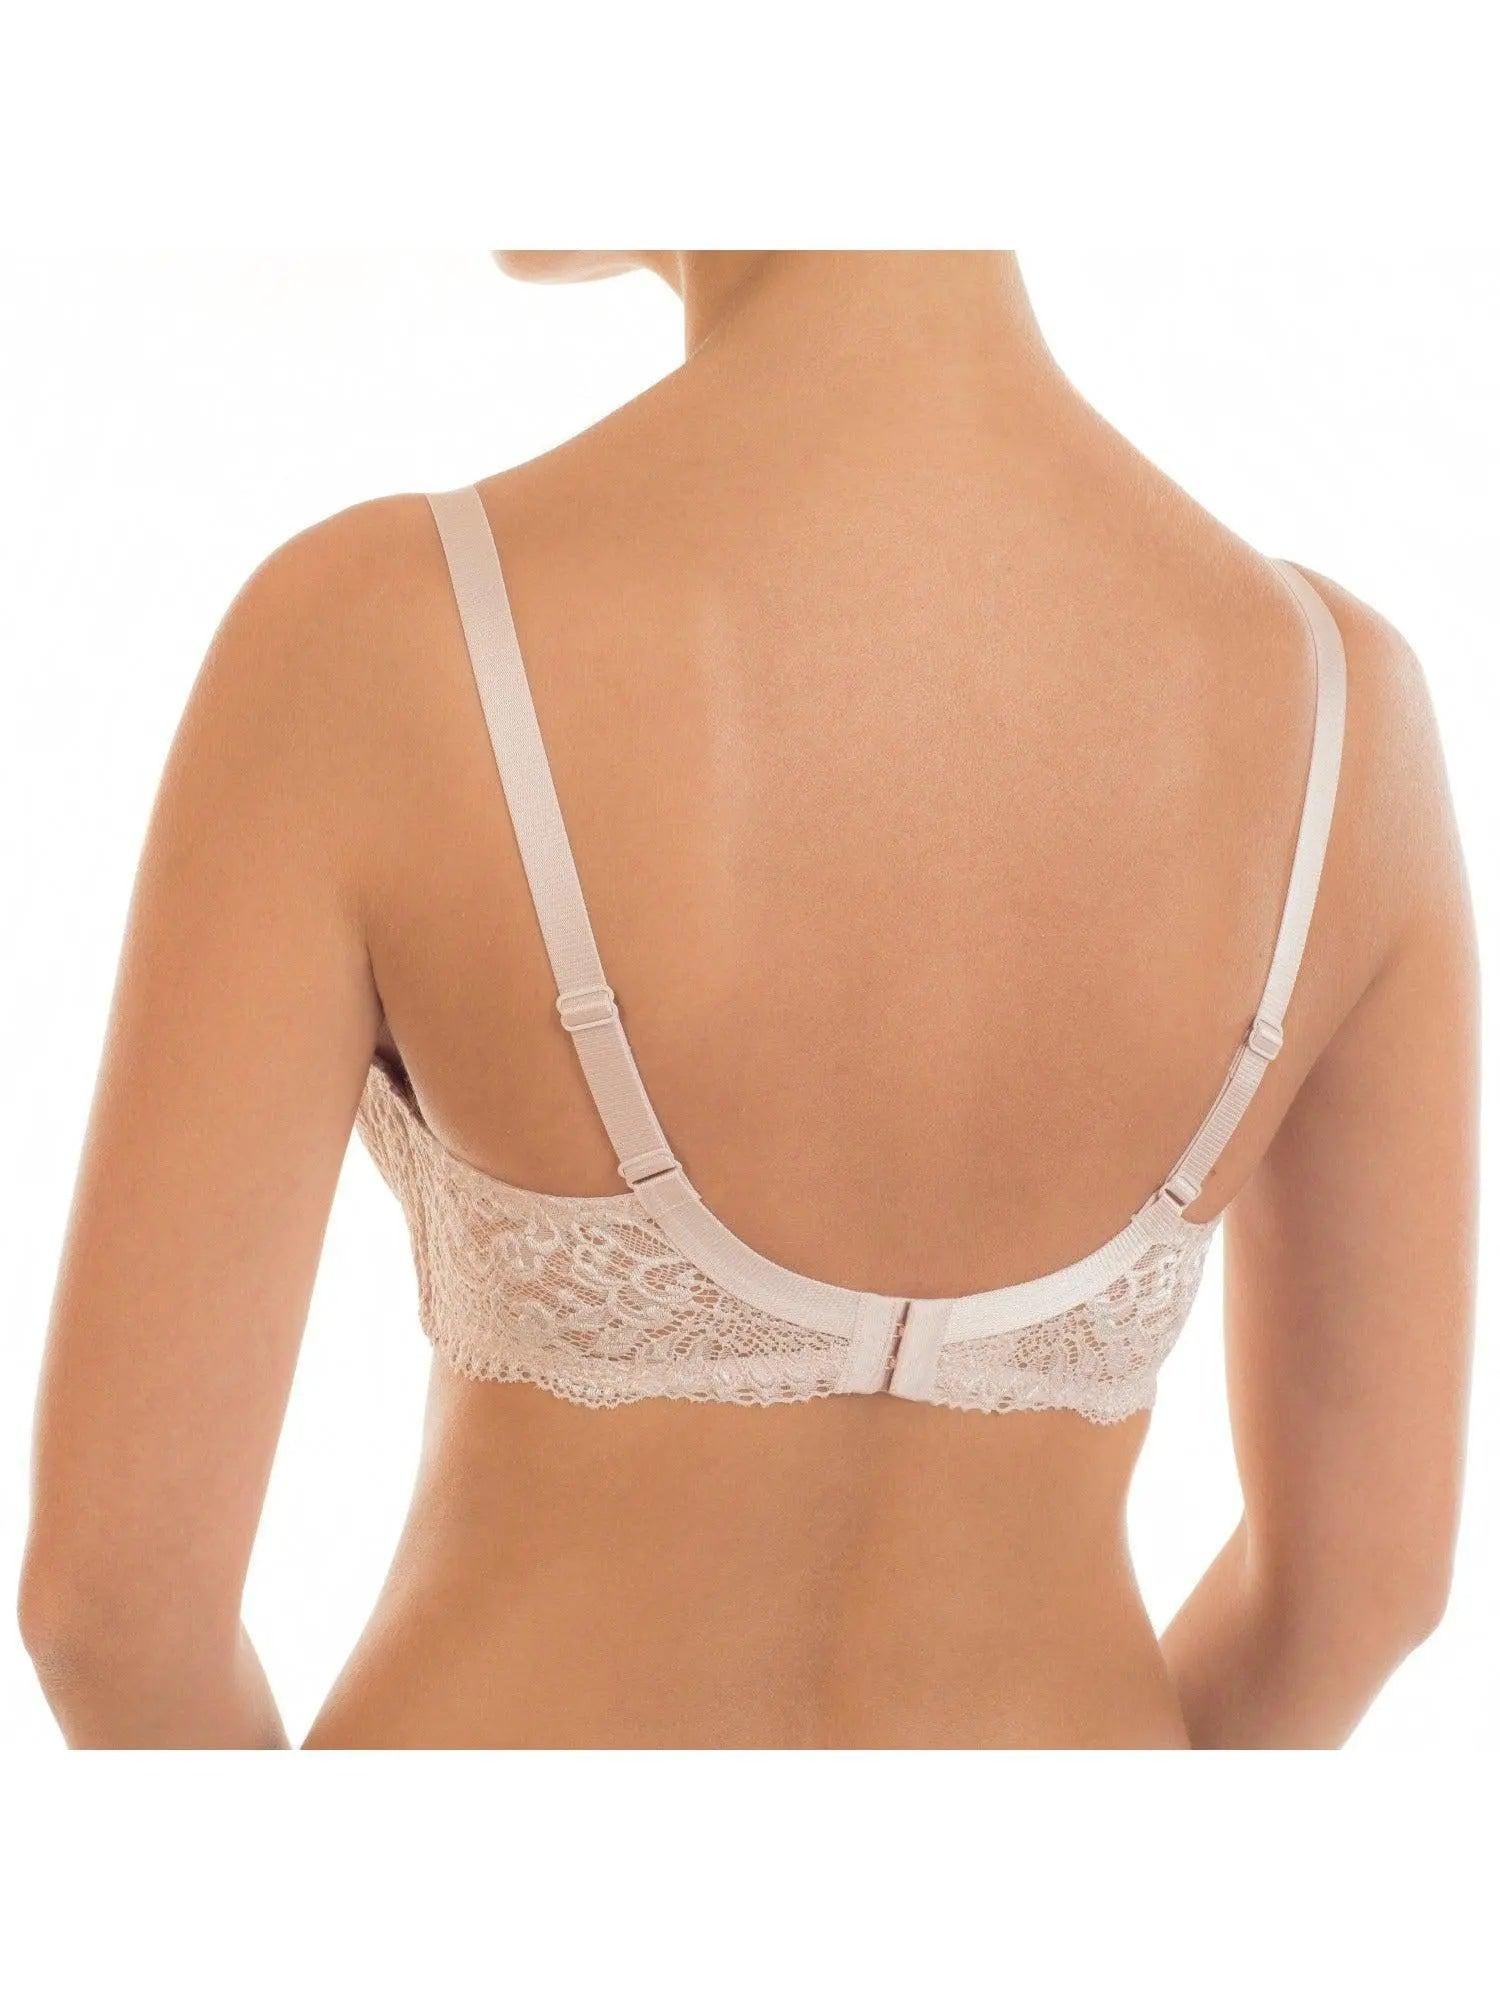 Back of Nikol Djumon Nude Victoria Lace Push Up Bra Style 13210